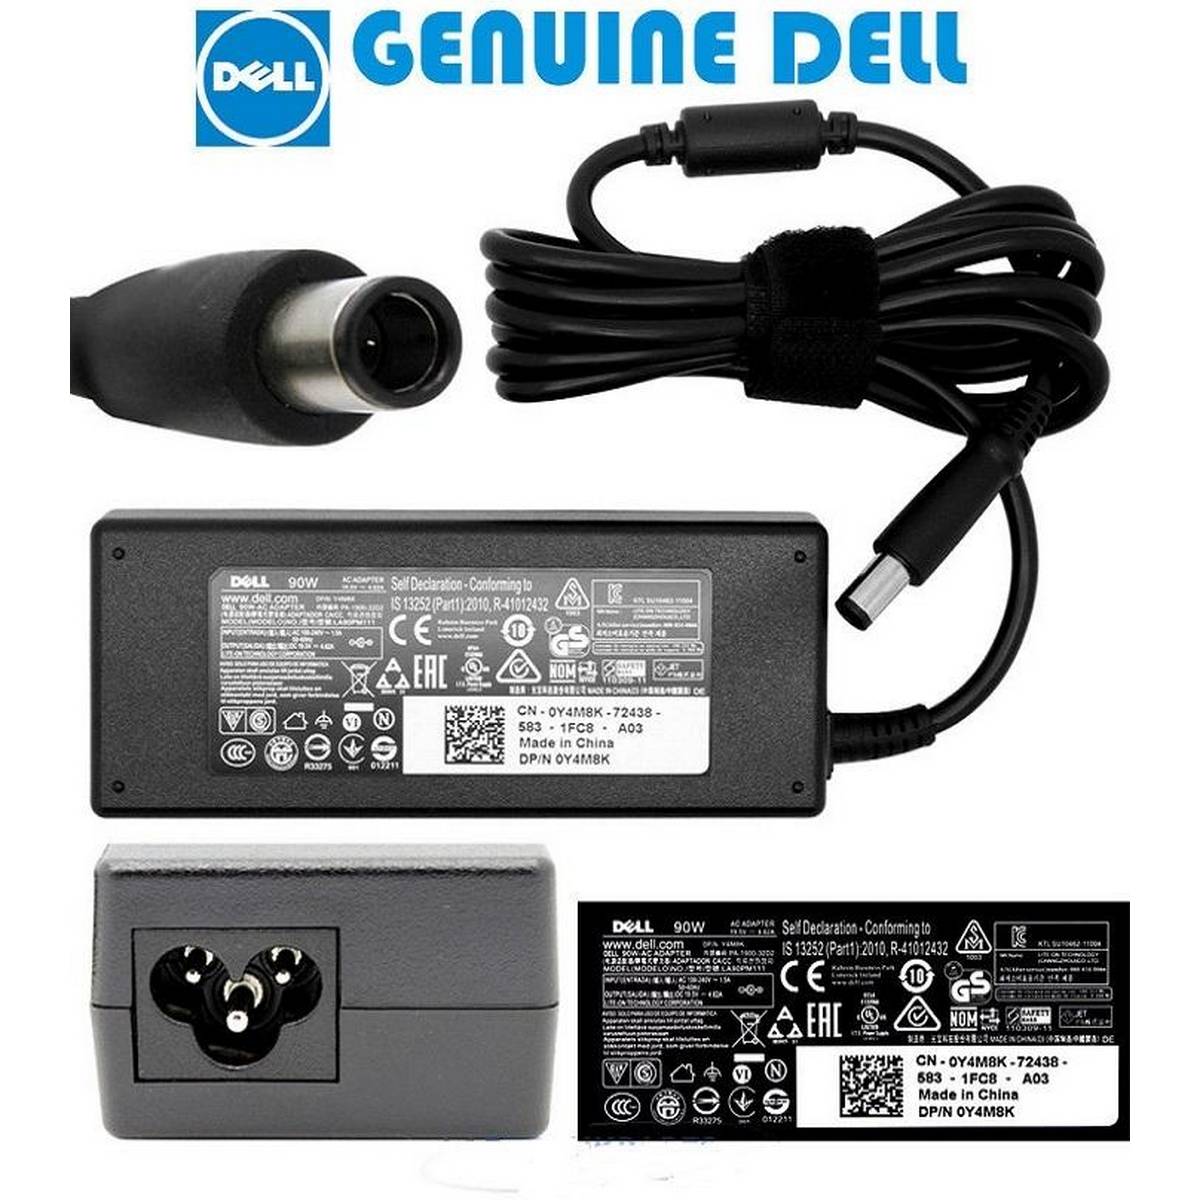 DELL Laptop Charger for Latitude with Power Supply